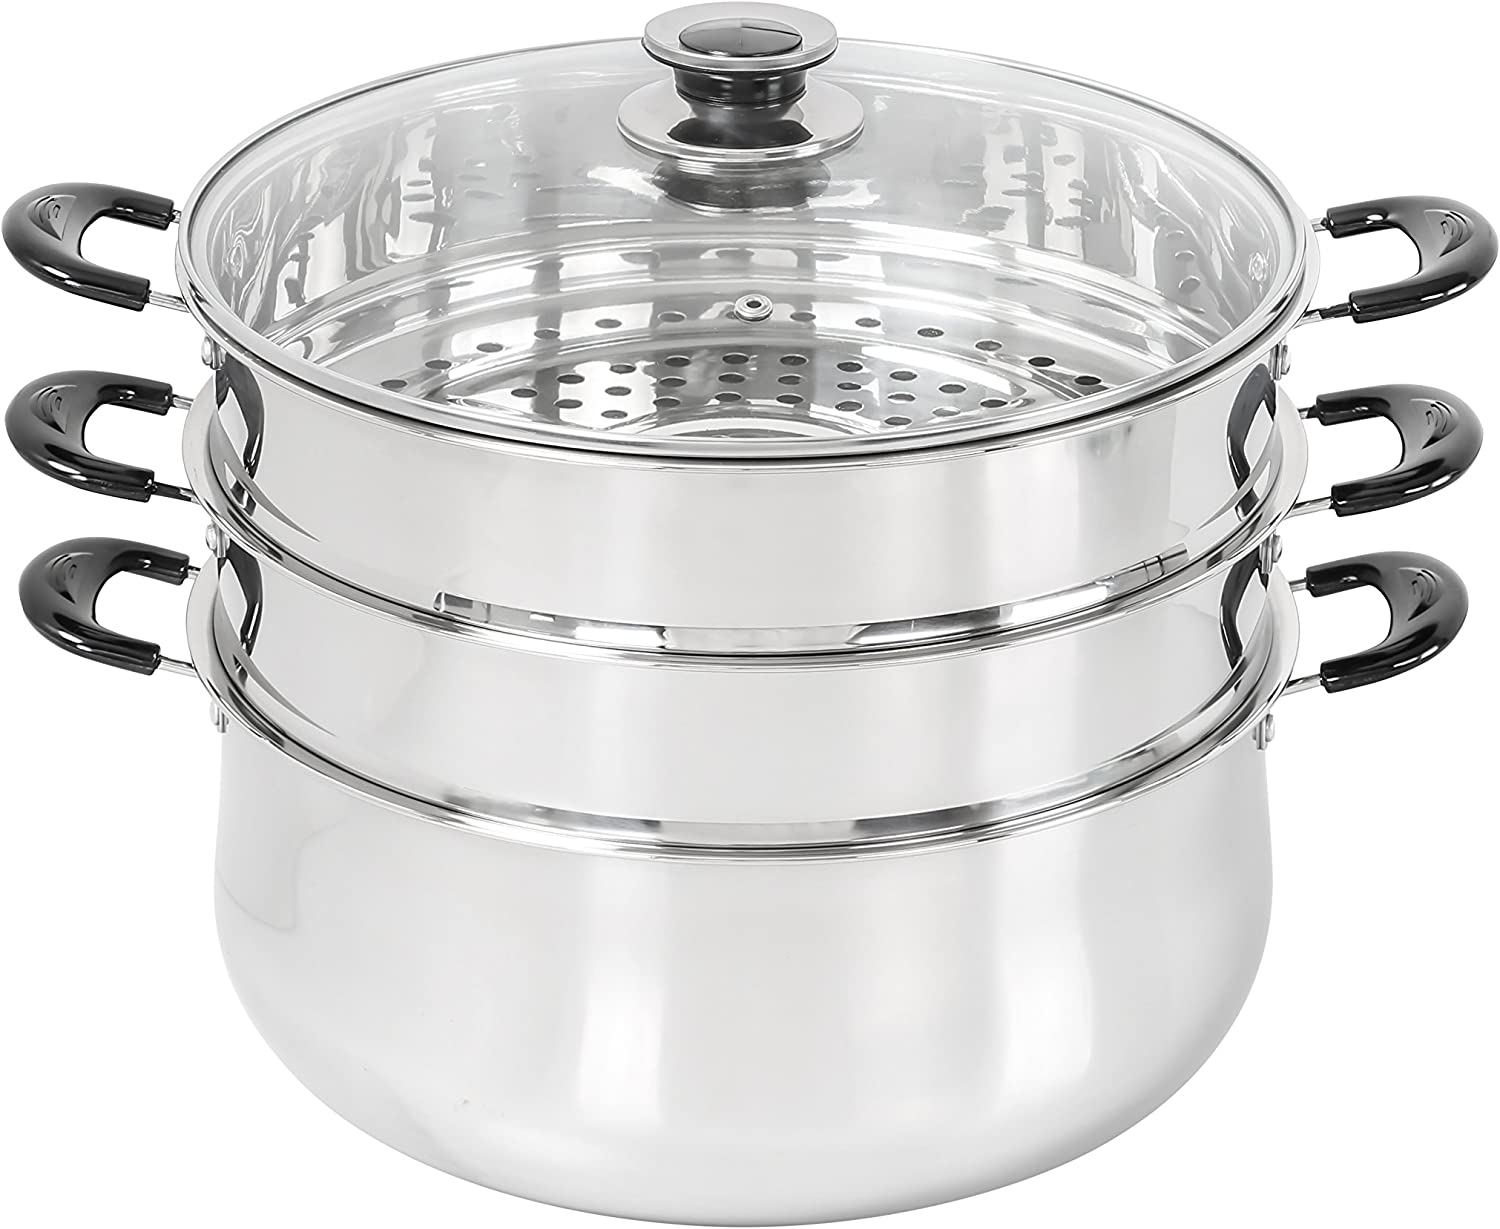 Concord Stainless Steel Stock Pot w/Steamer Basket Cookware Great for Boiling and Steaming (24 quart)